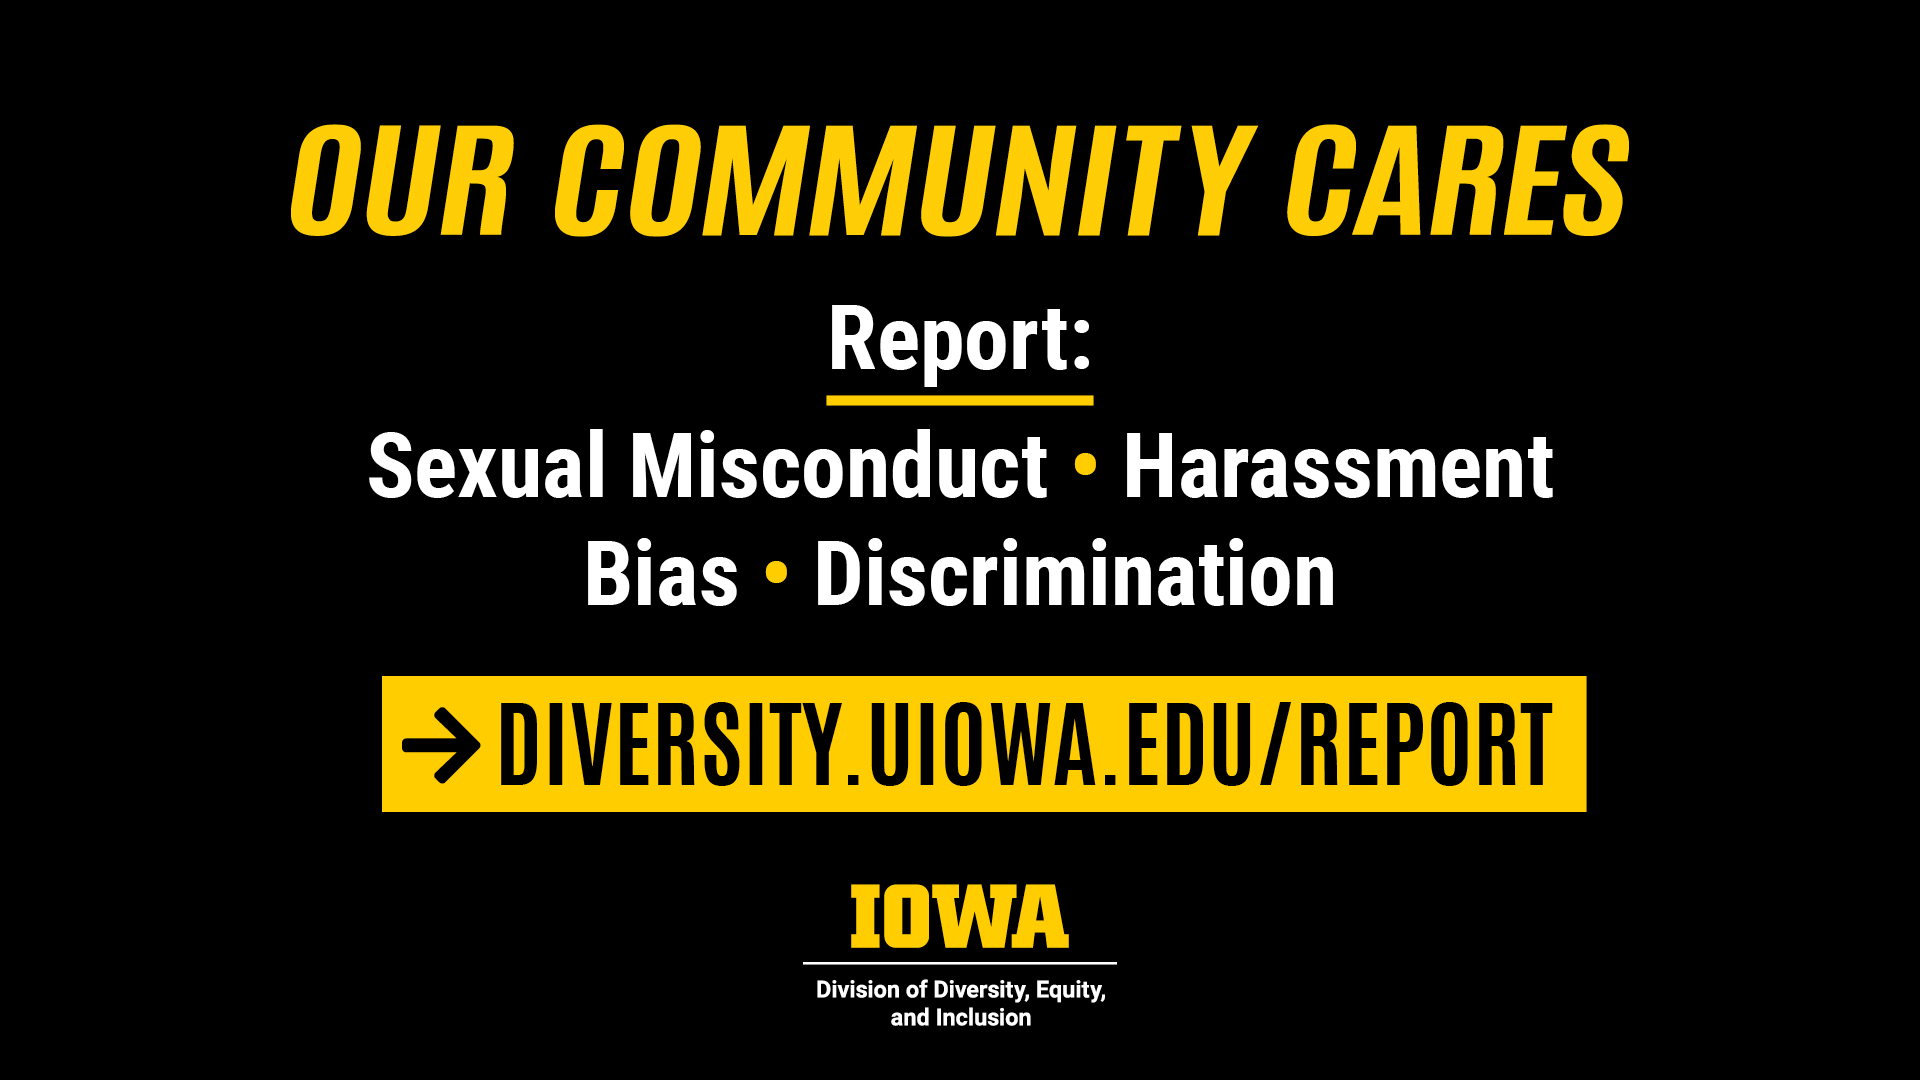 A sign including the UI Division of Diversity, Equity, and Inclusion logo and the following text: "Our community cares. Report: sexual conduct, harassment, bias, discrimination. diversity.uiowa.edu/report"